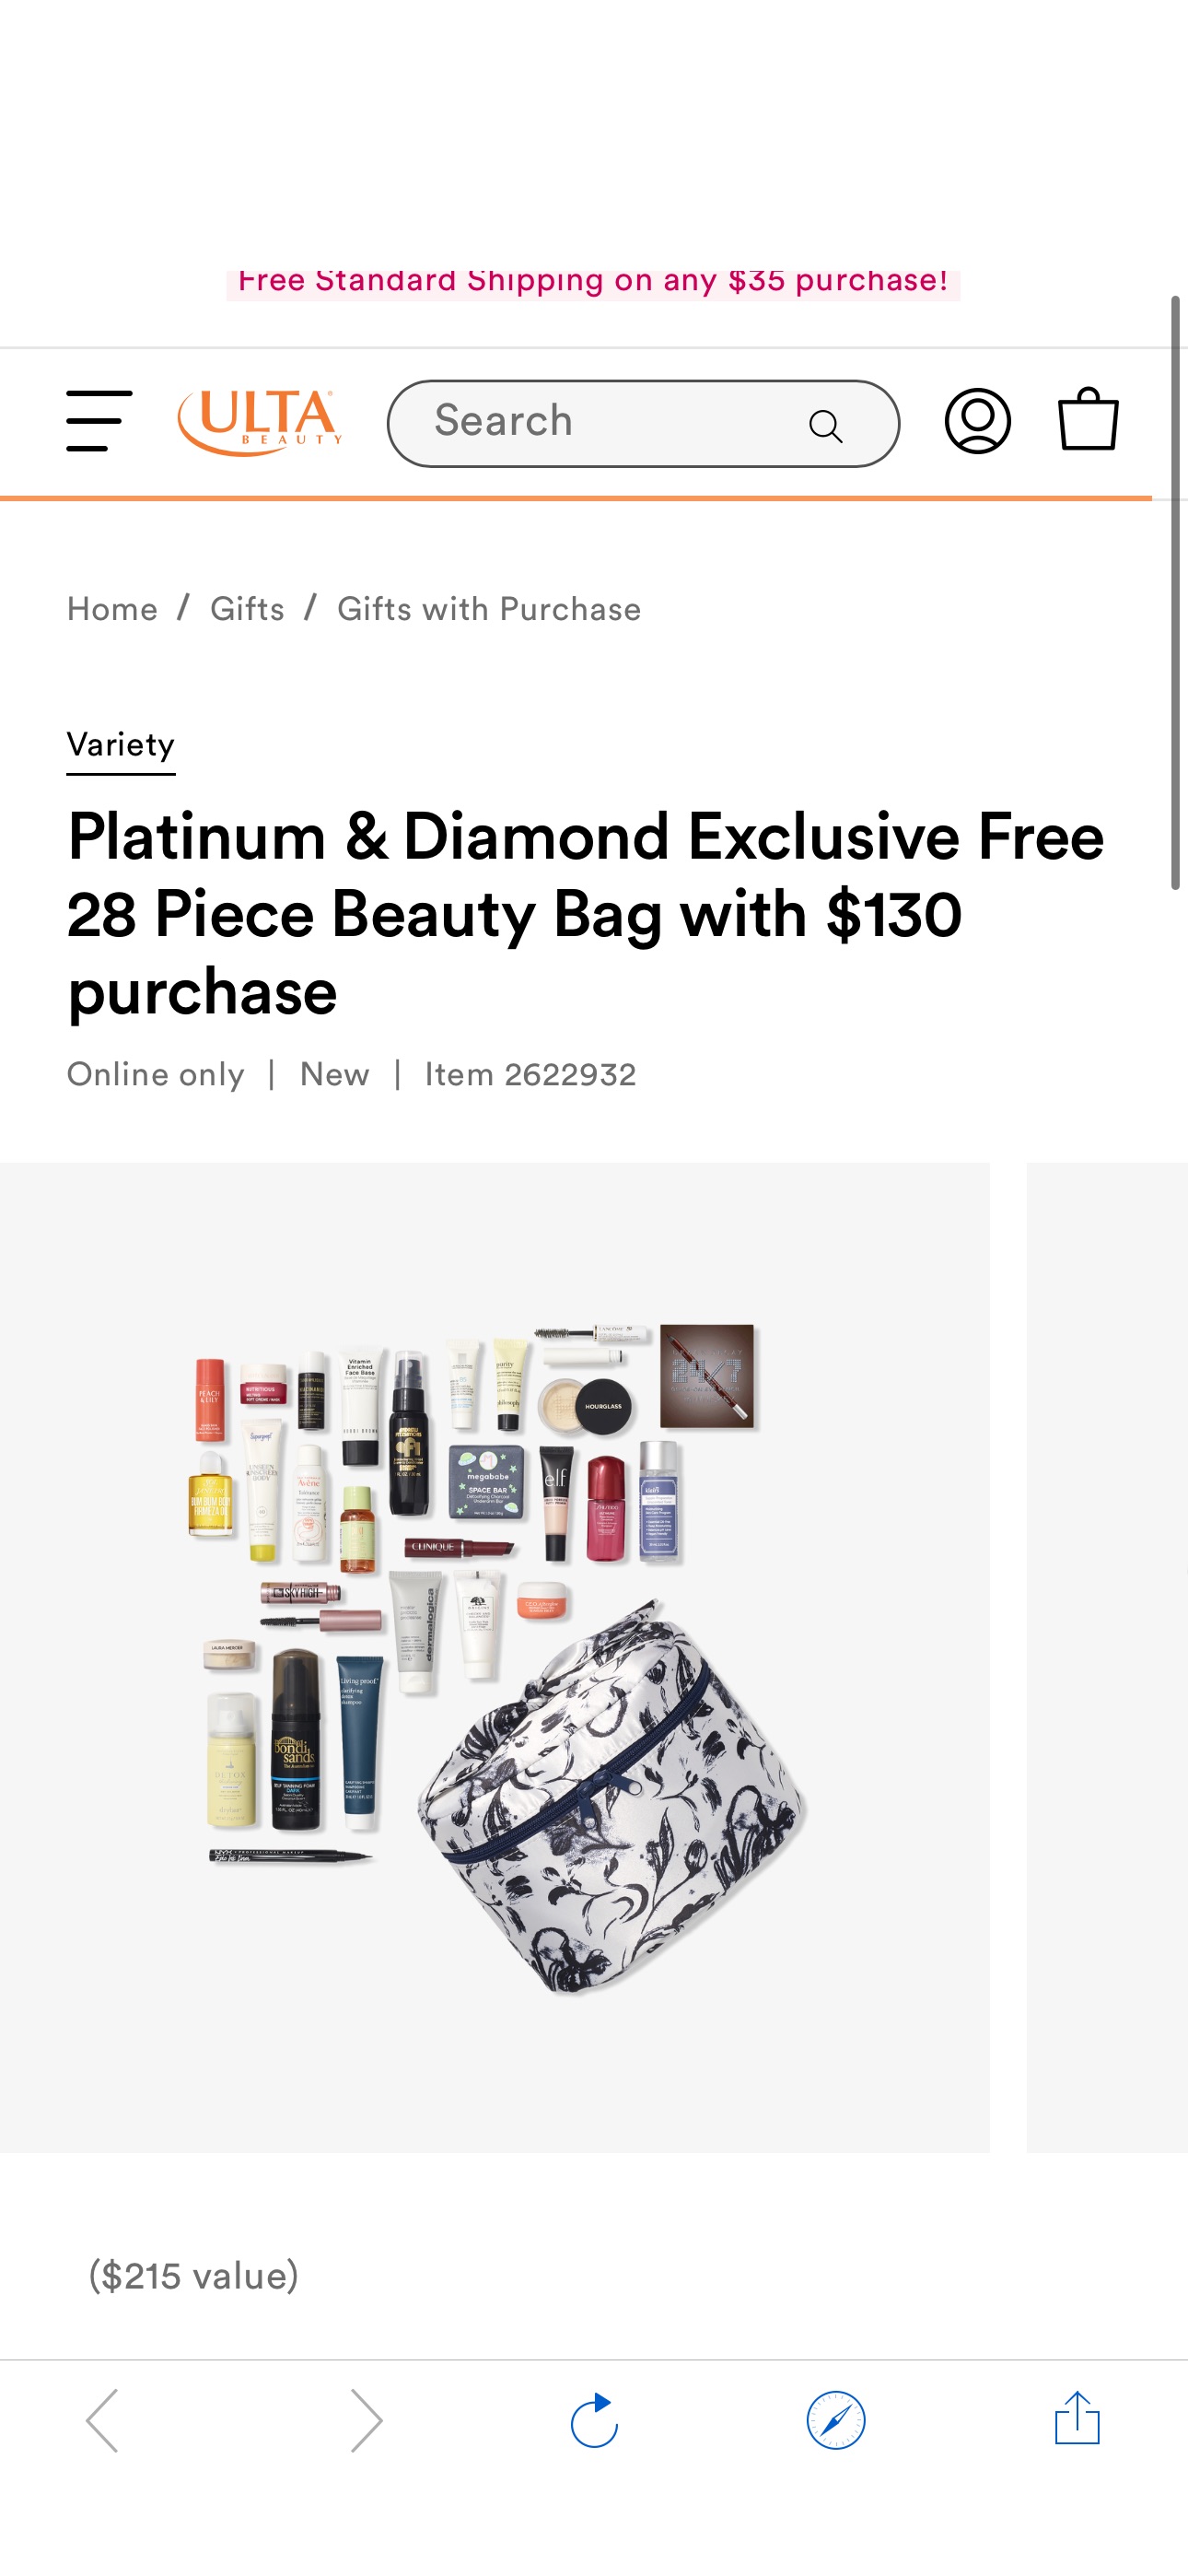 Platinum & Diamond Exclusive Free 28 Piece Beauty Bag with $130 purchase - Variety | Ulta Beauty